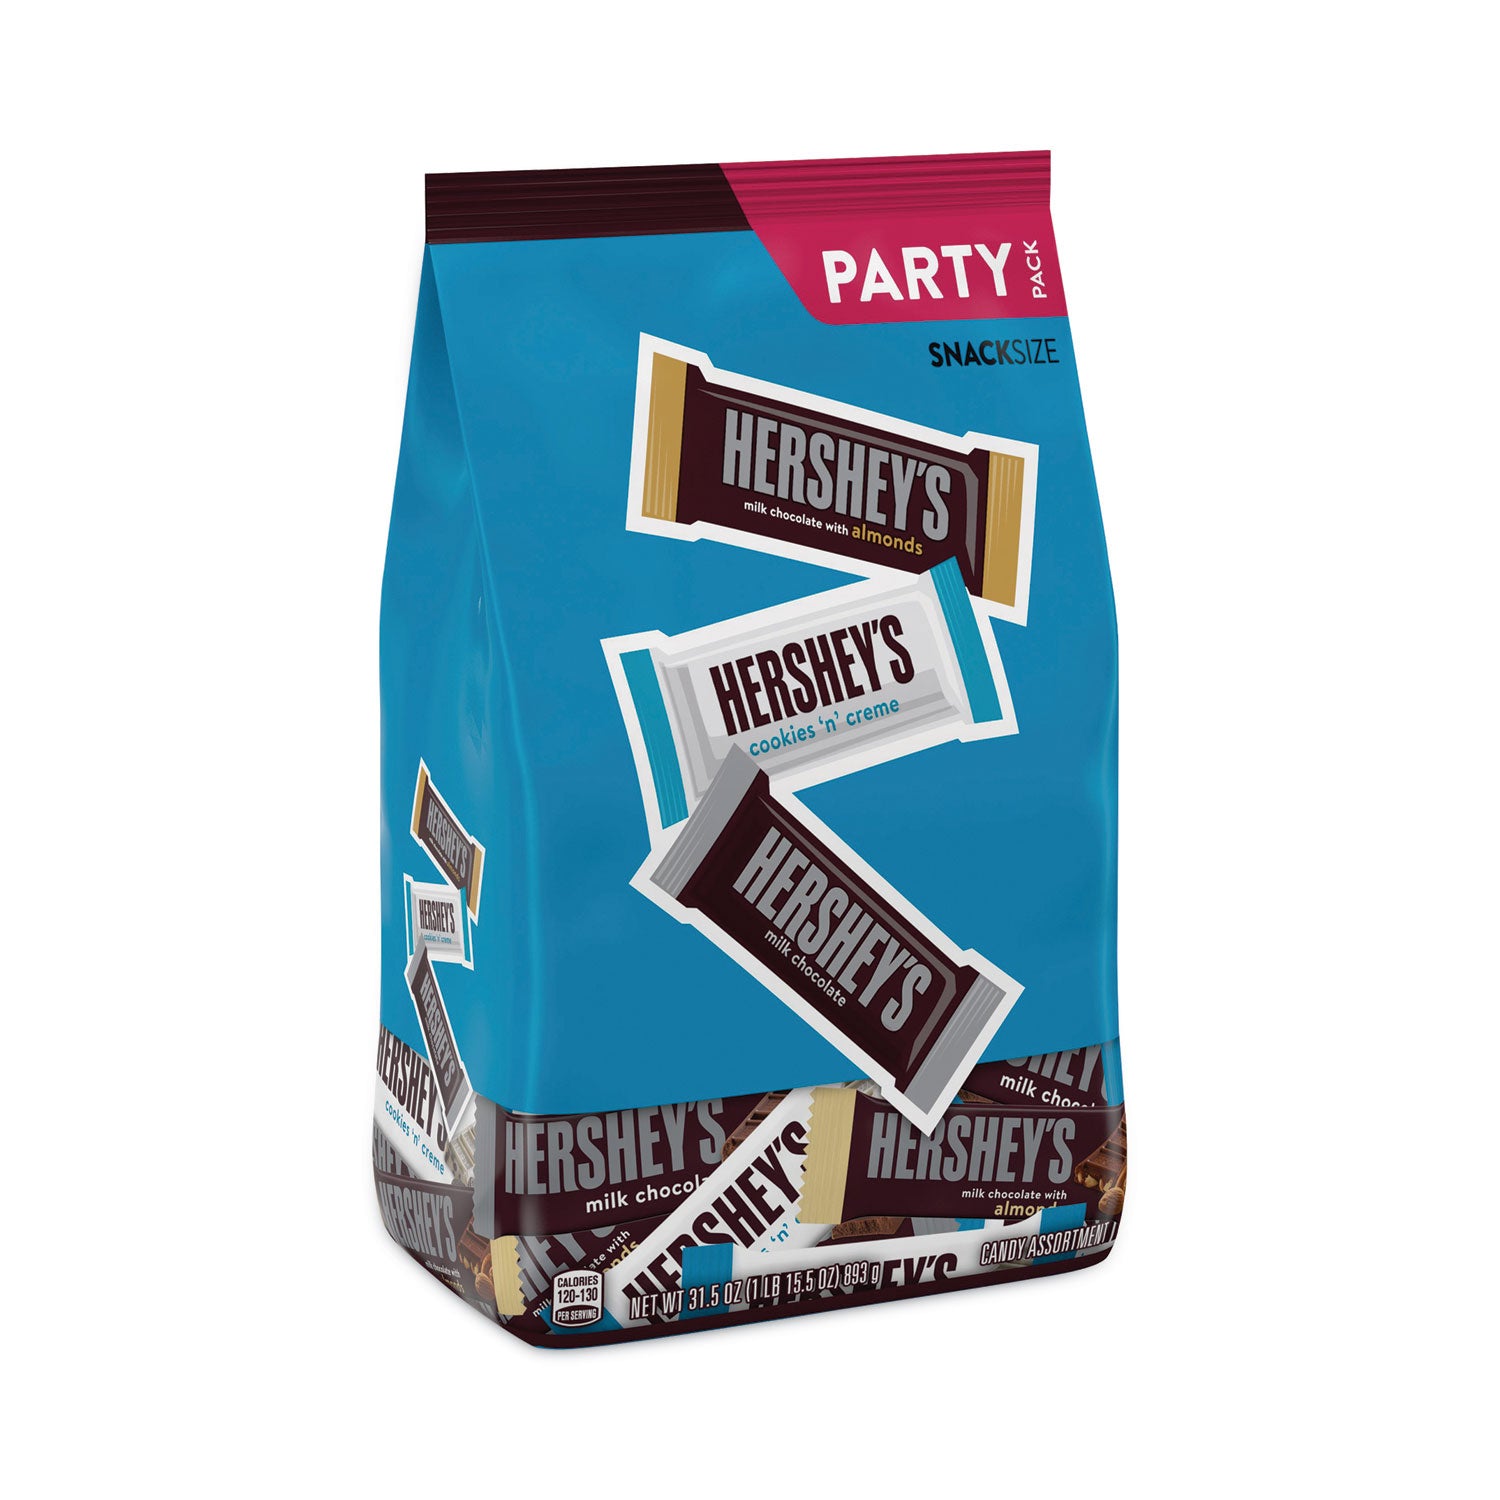 hersheys-snack-size-chocolate-candy-assortment-party-pack-315-oz-bag_twzhec93933 - 1